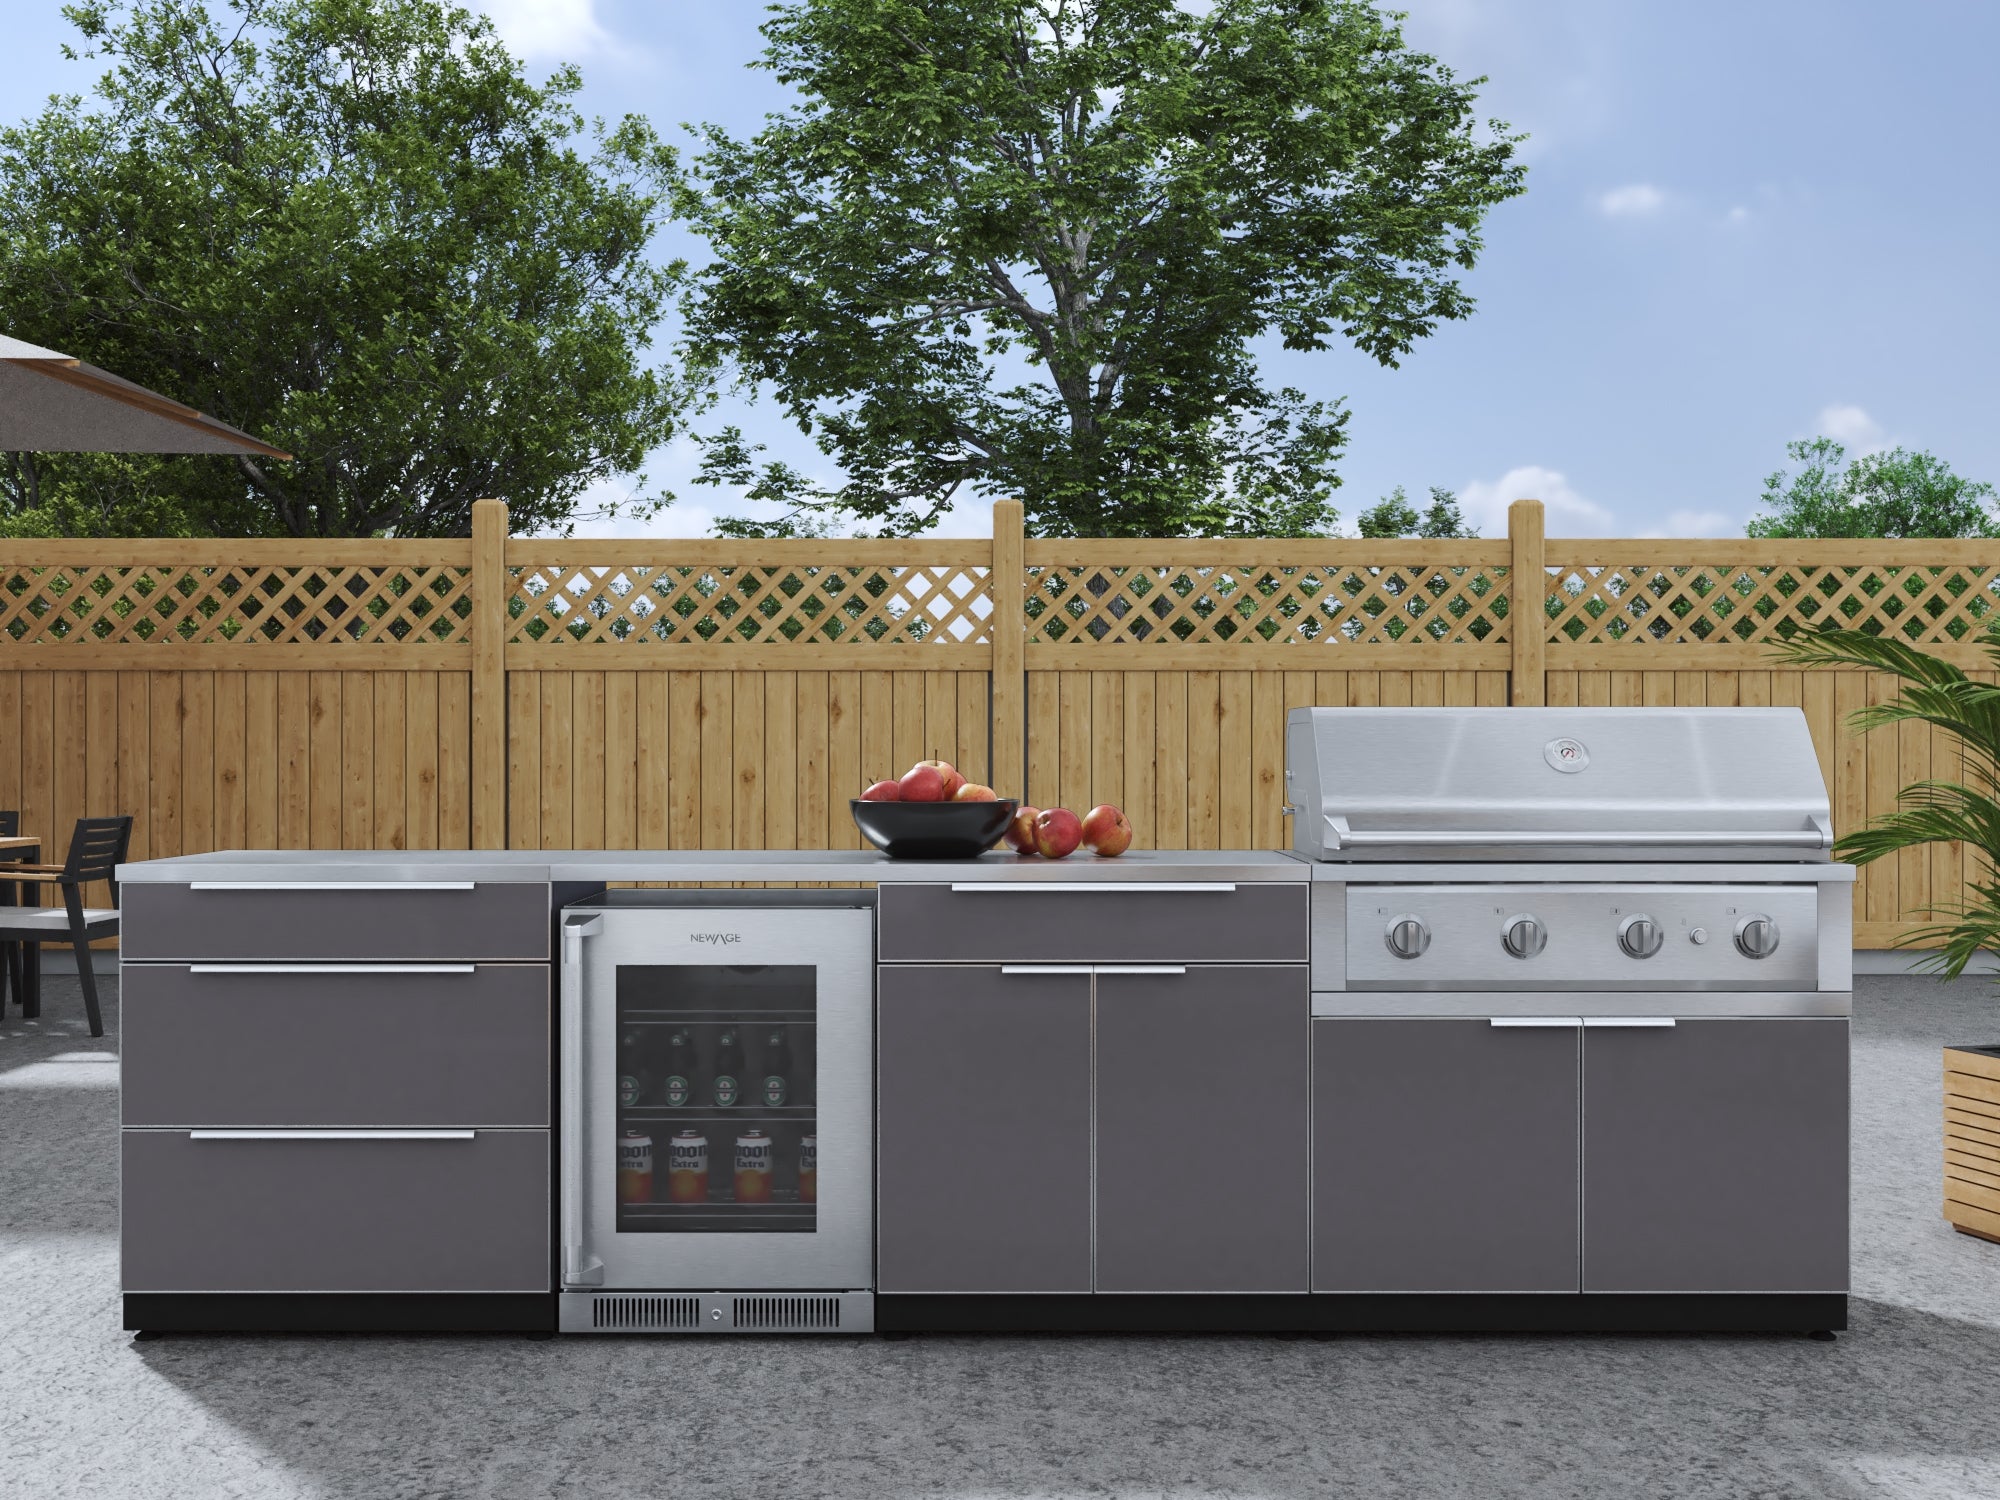 Outdoor Kitchen Aluminum 7 Piece Cabinet Set with 3-Drawer, Bar, Grill Cabinet, Performance Grill, Countertops and Fridge